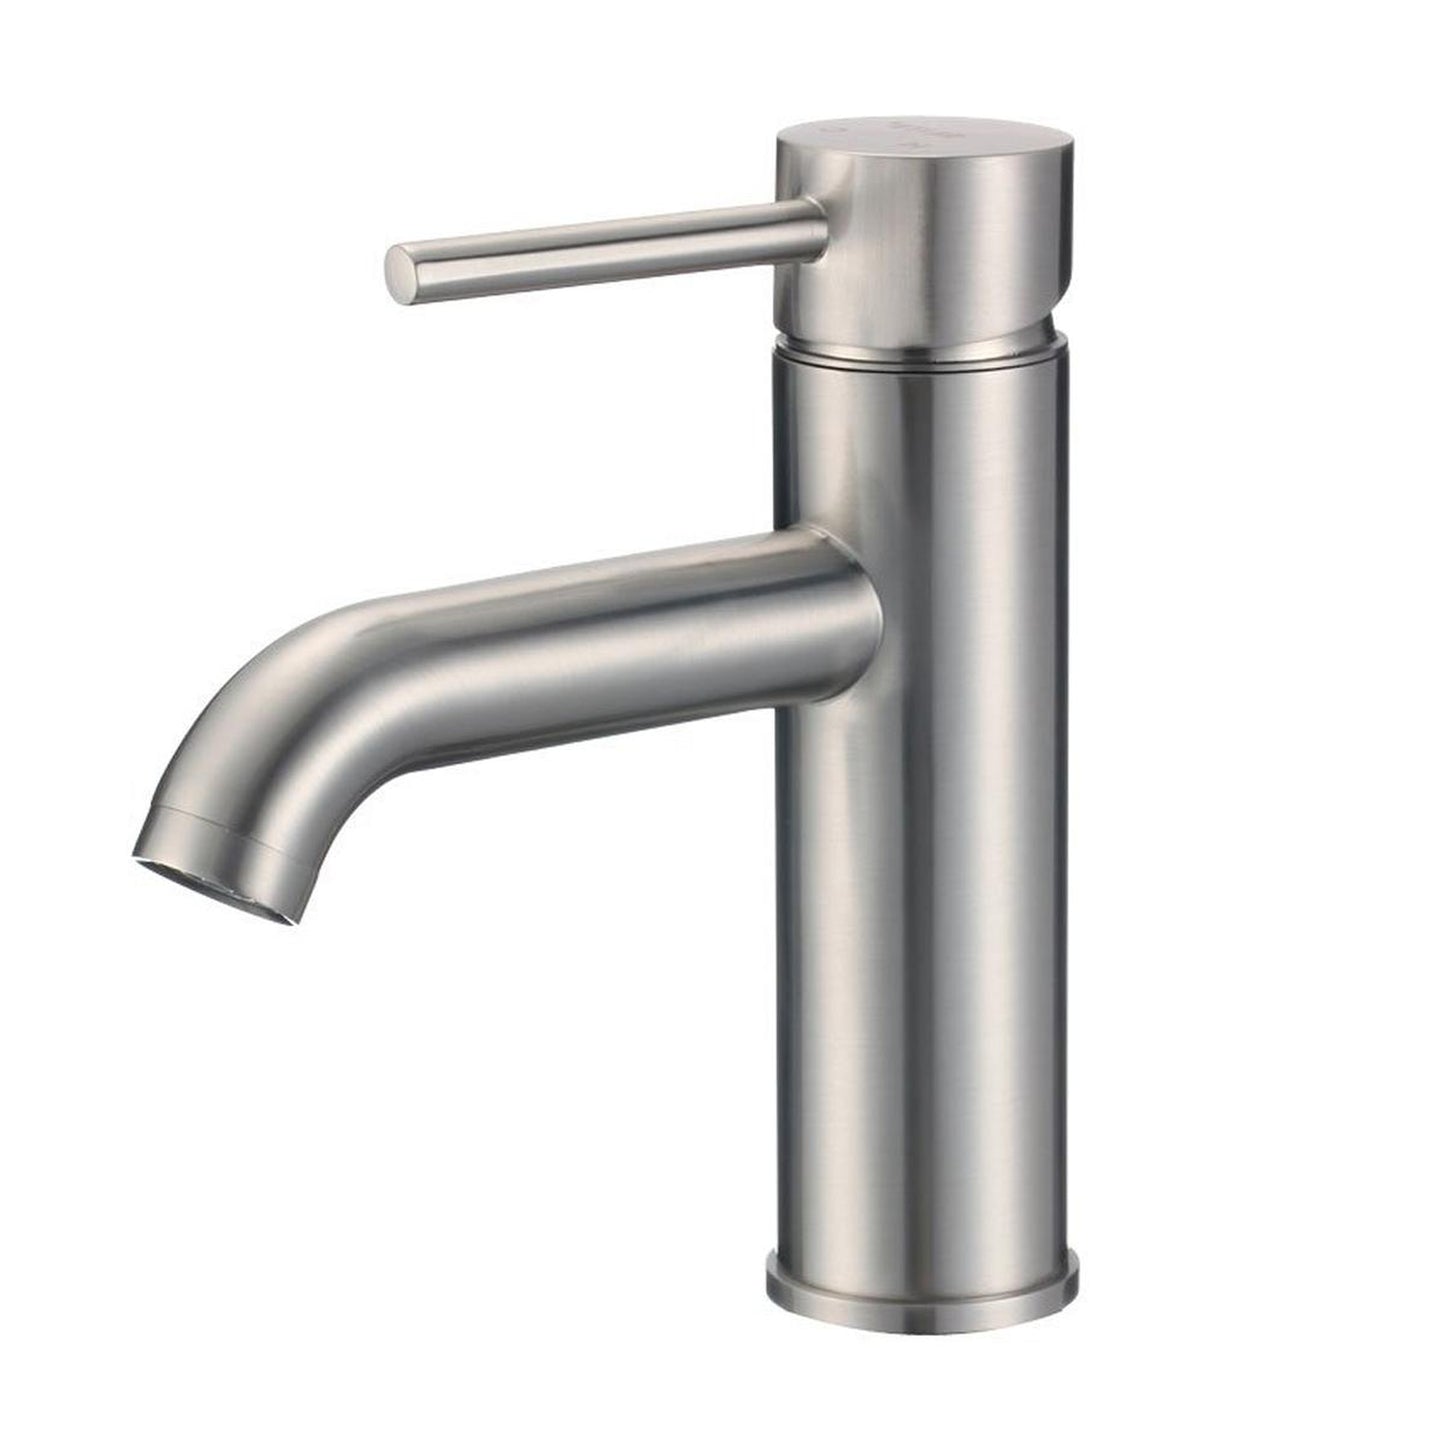 Pelican Int'l Cascade Series PL-8113 Single Hole Bathroom Faucet In Brushed Nickel Finish